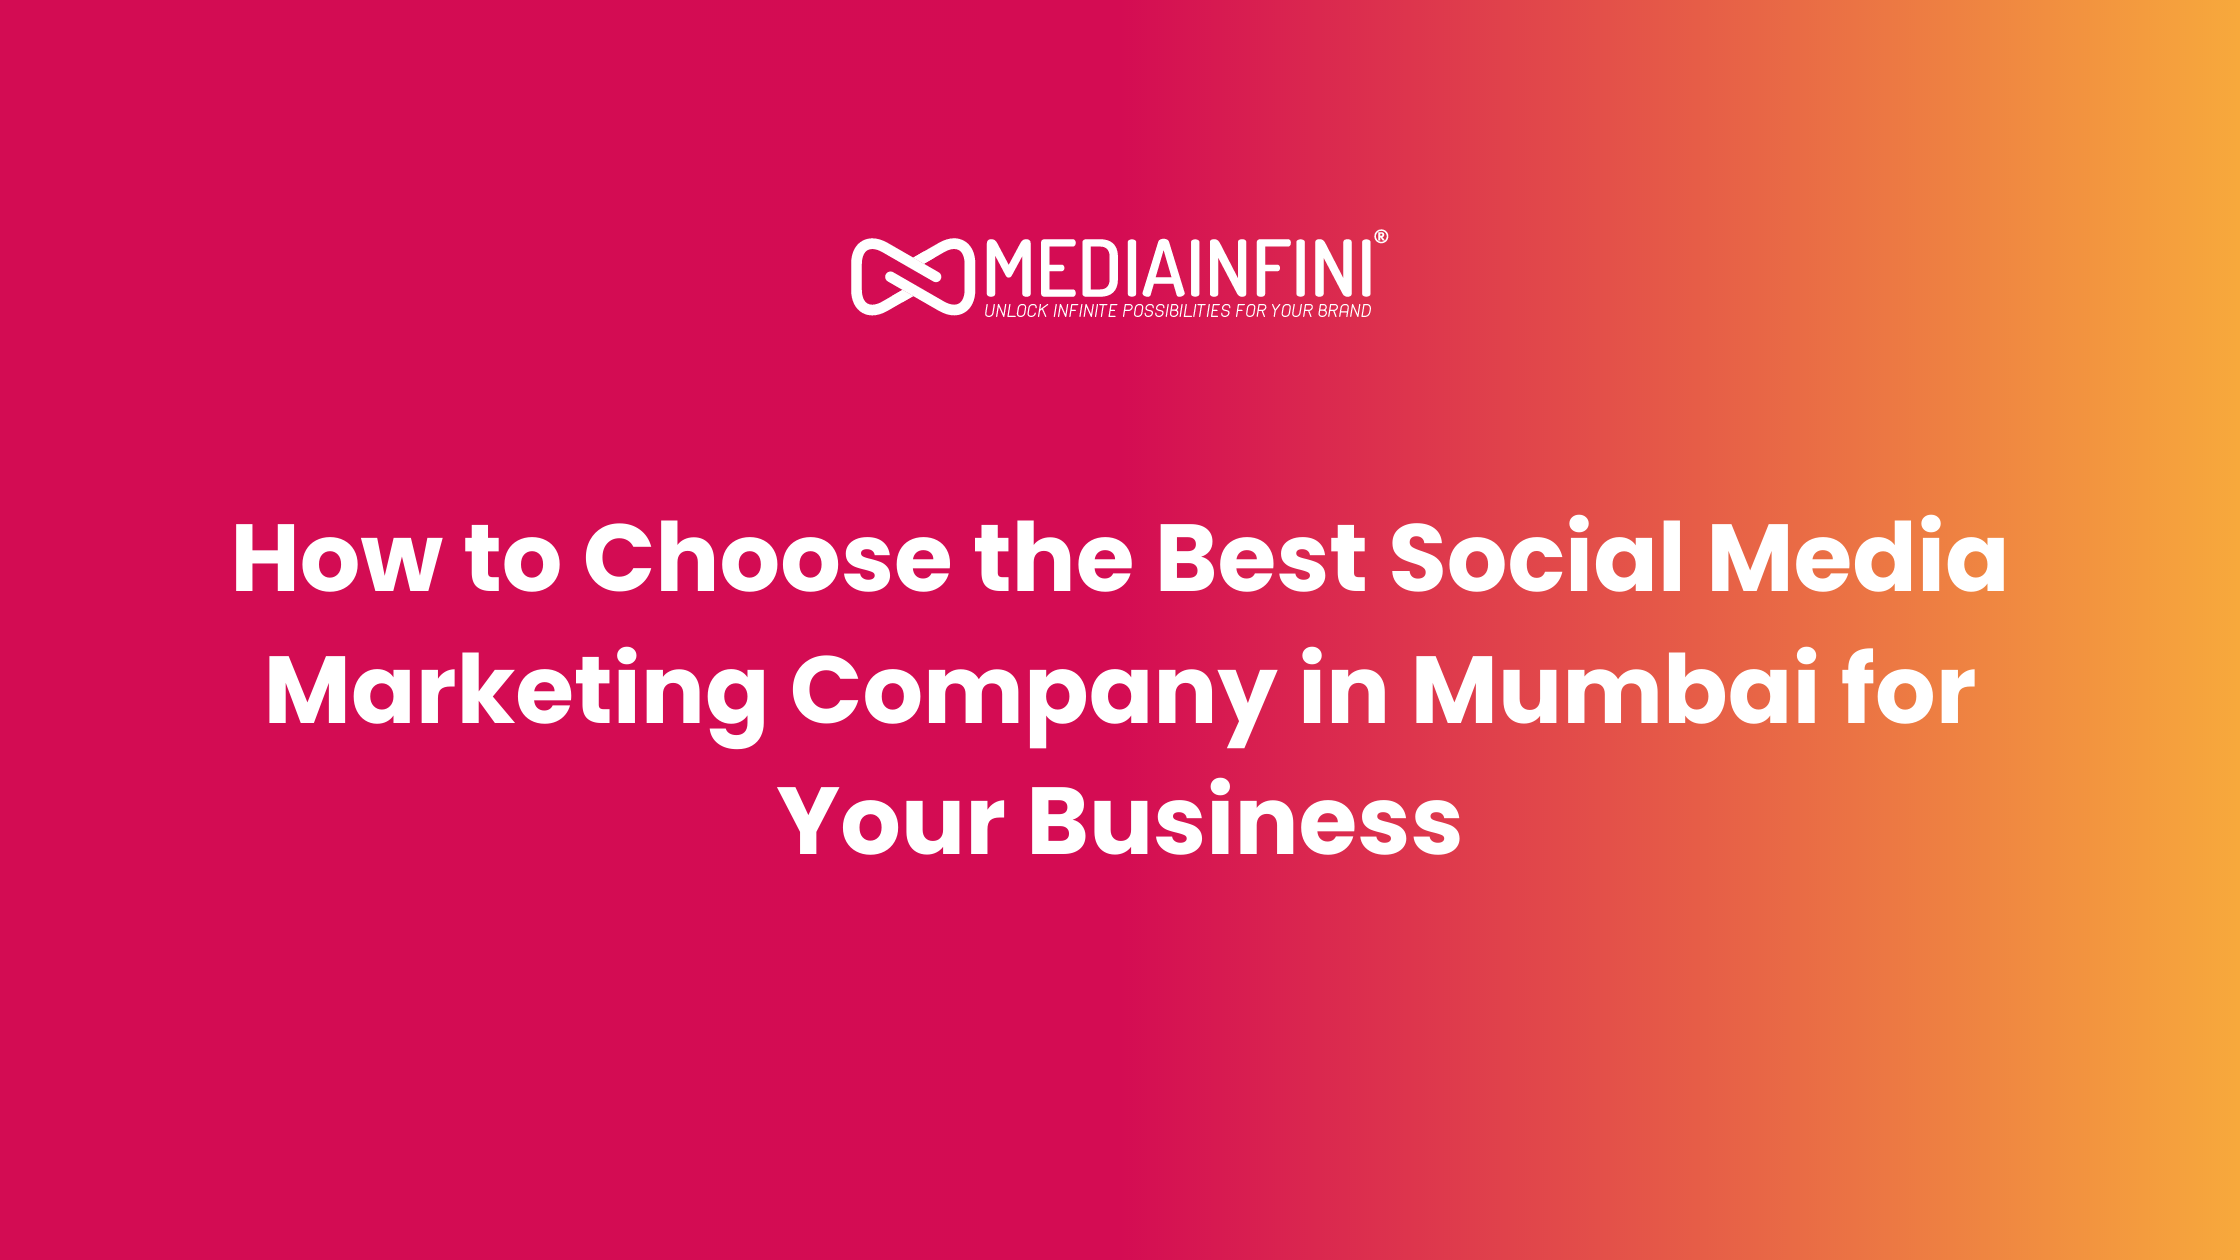 How to Choose the Best Social Media Marketing Company in Mumbai for Your Business